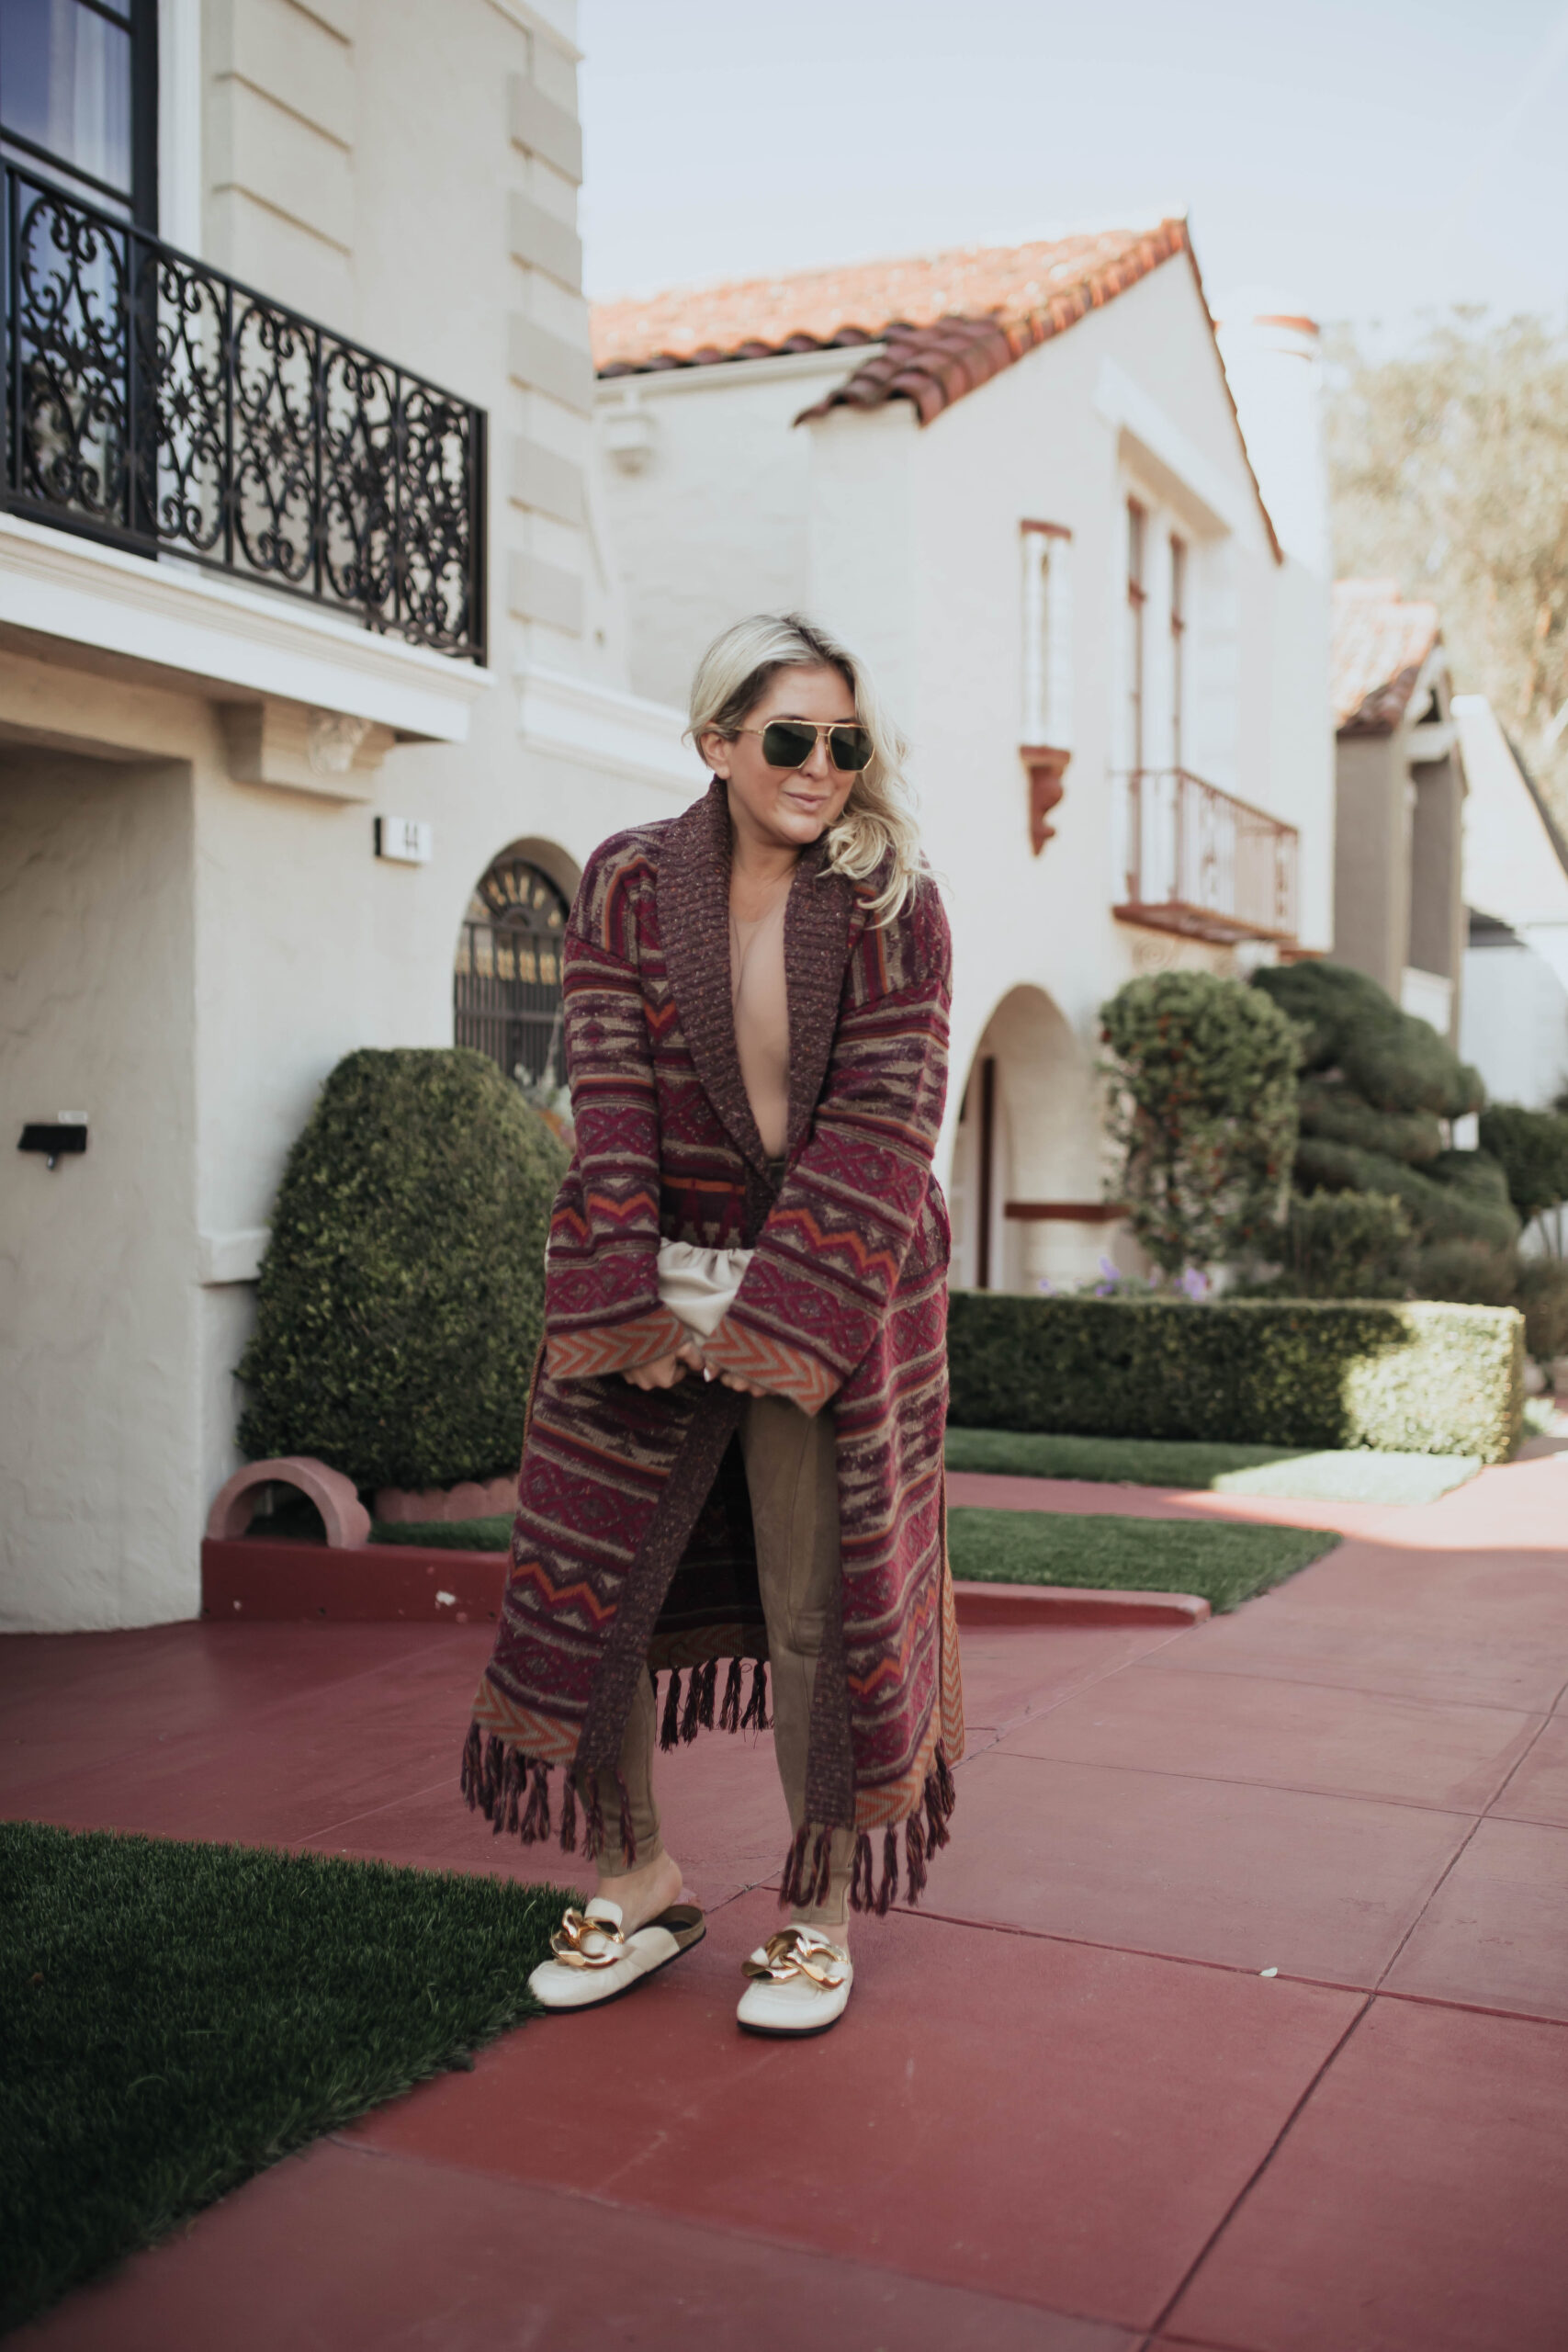 Senreve Conetti Bag Review, San Francisco fashion blogger KatWalkSF wears the House of Harlow Guinevere Duster with the Senreve Conetti Bag